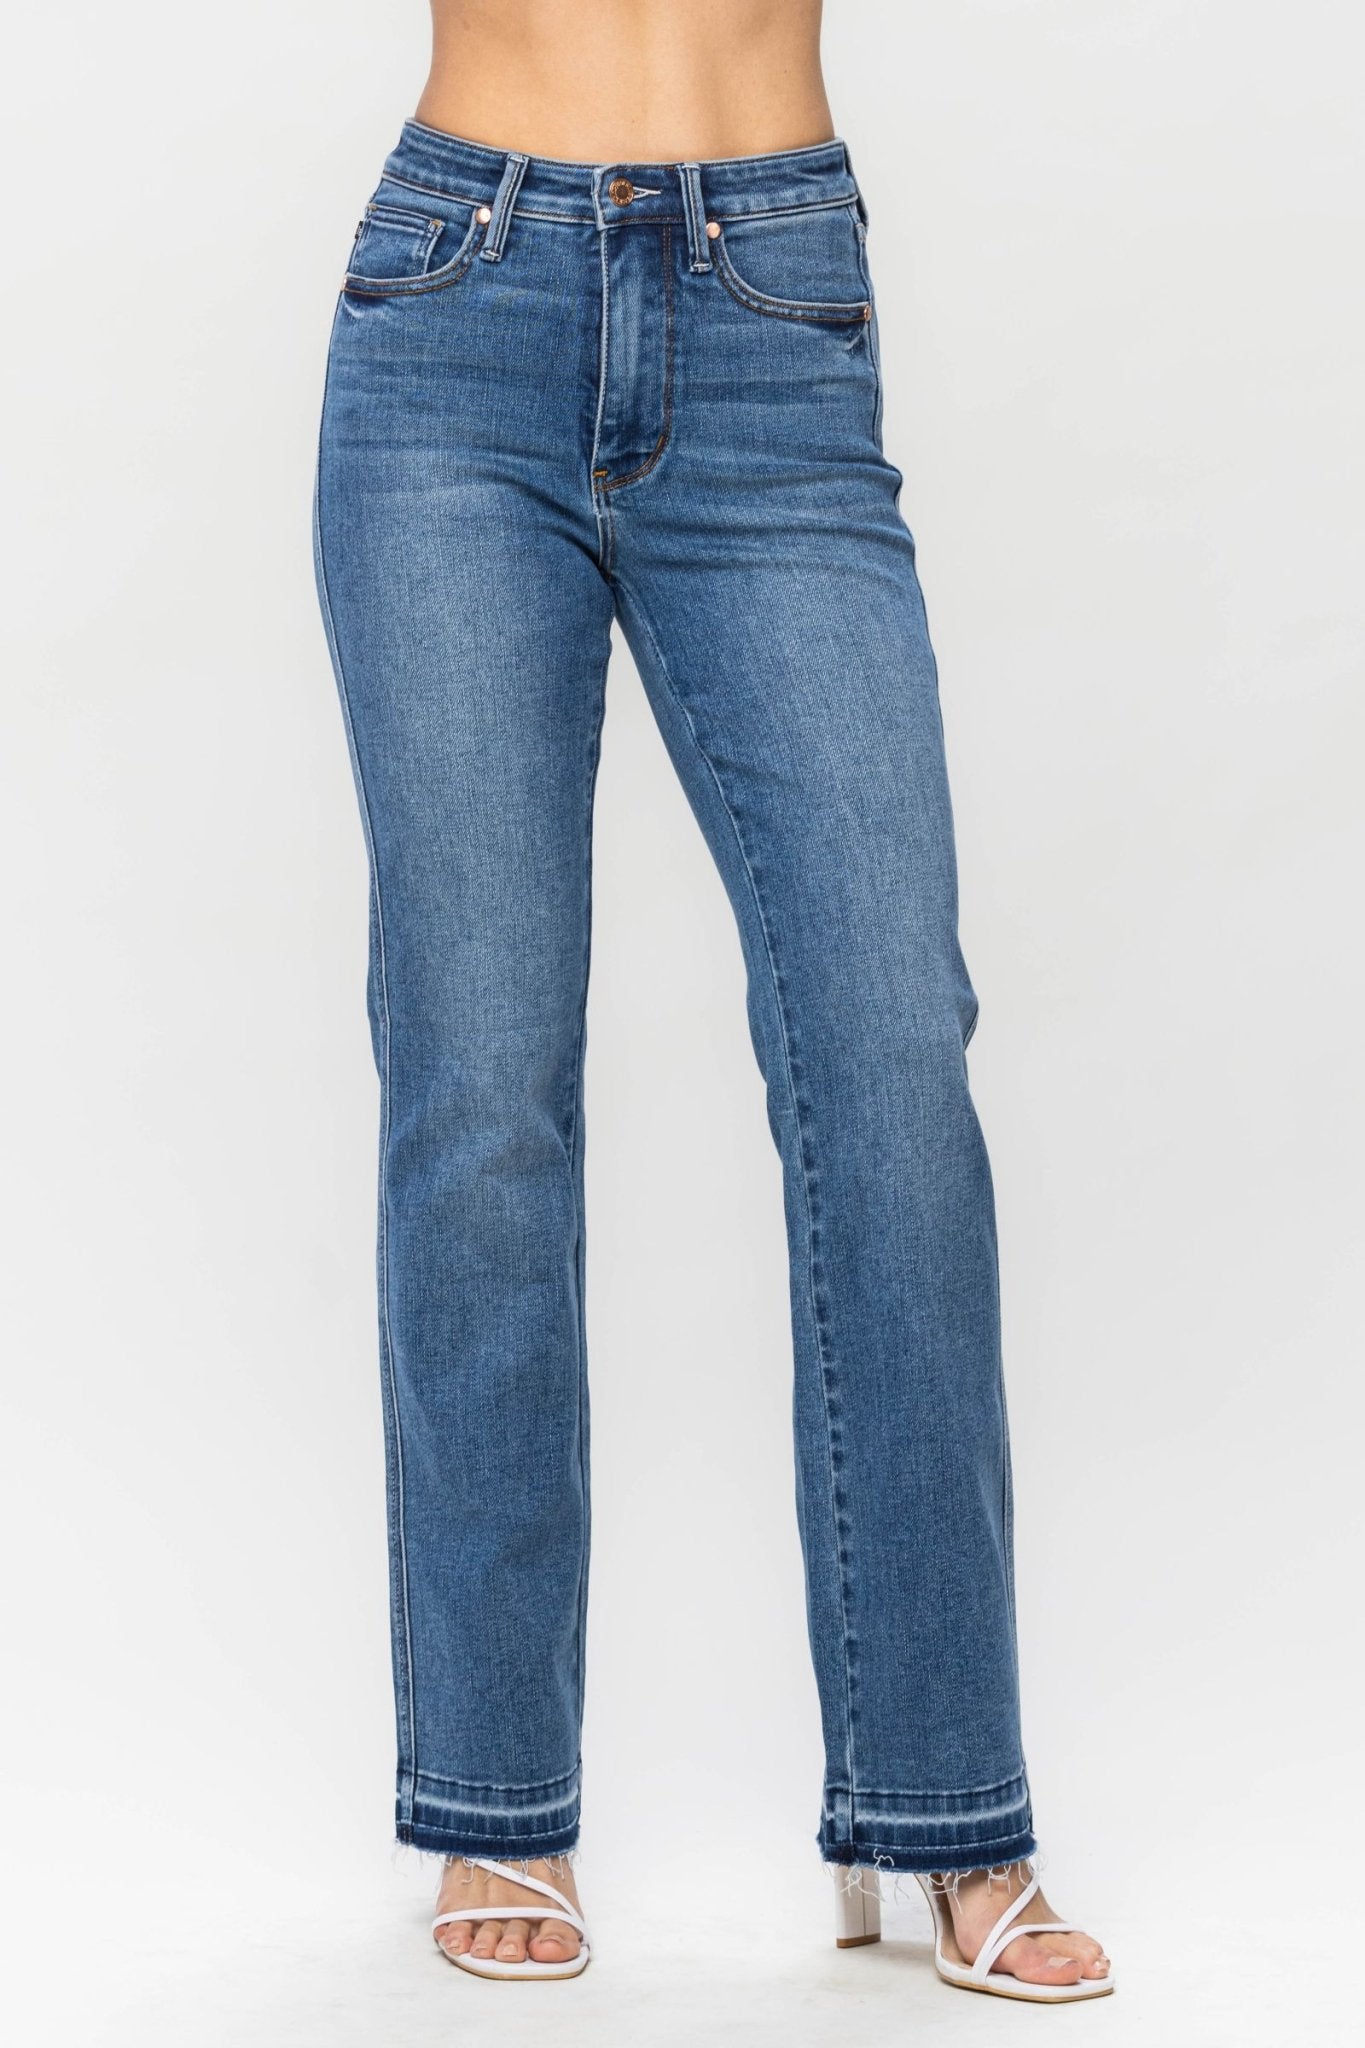 Sawmew Bootcut Jeans The Lady Baggy Low Waist Straight Jeans Long Stretch  Vintage Flare Jeans In Boyfriend Jeans Skinny Slim Fit Schlaghose Denim  Hose (Color : Blue C, Size : 3XL) 